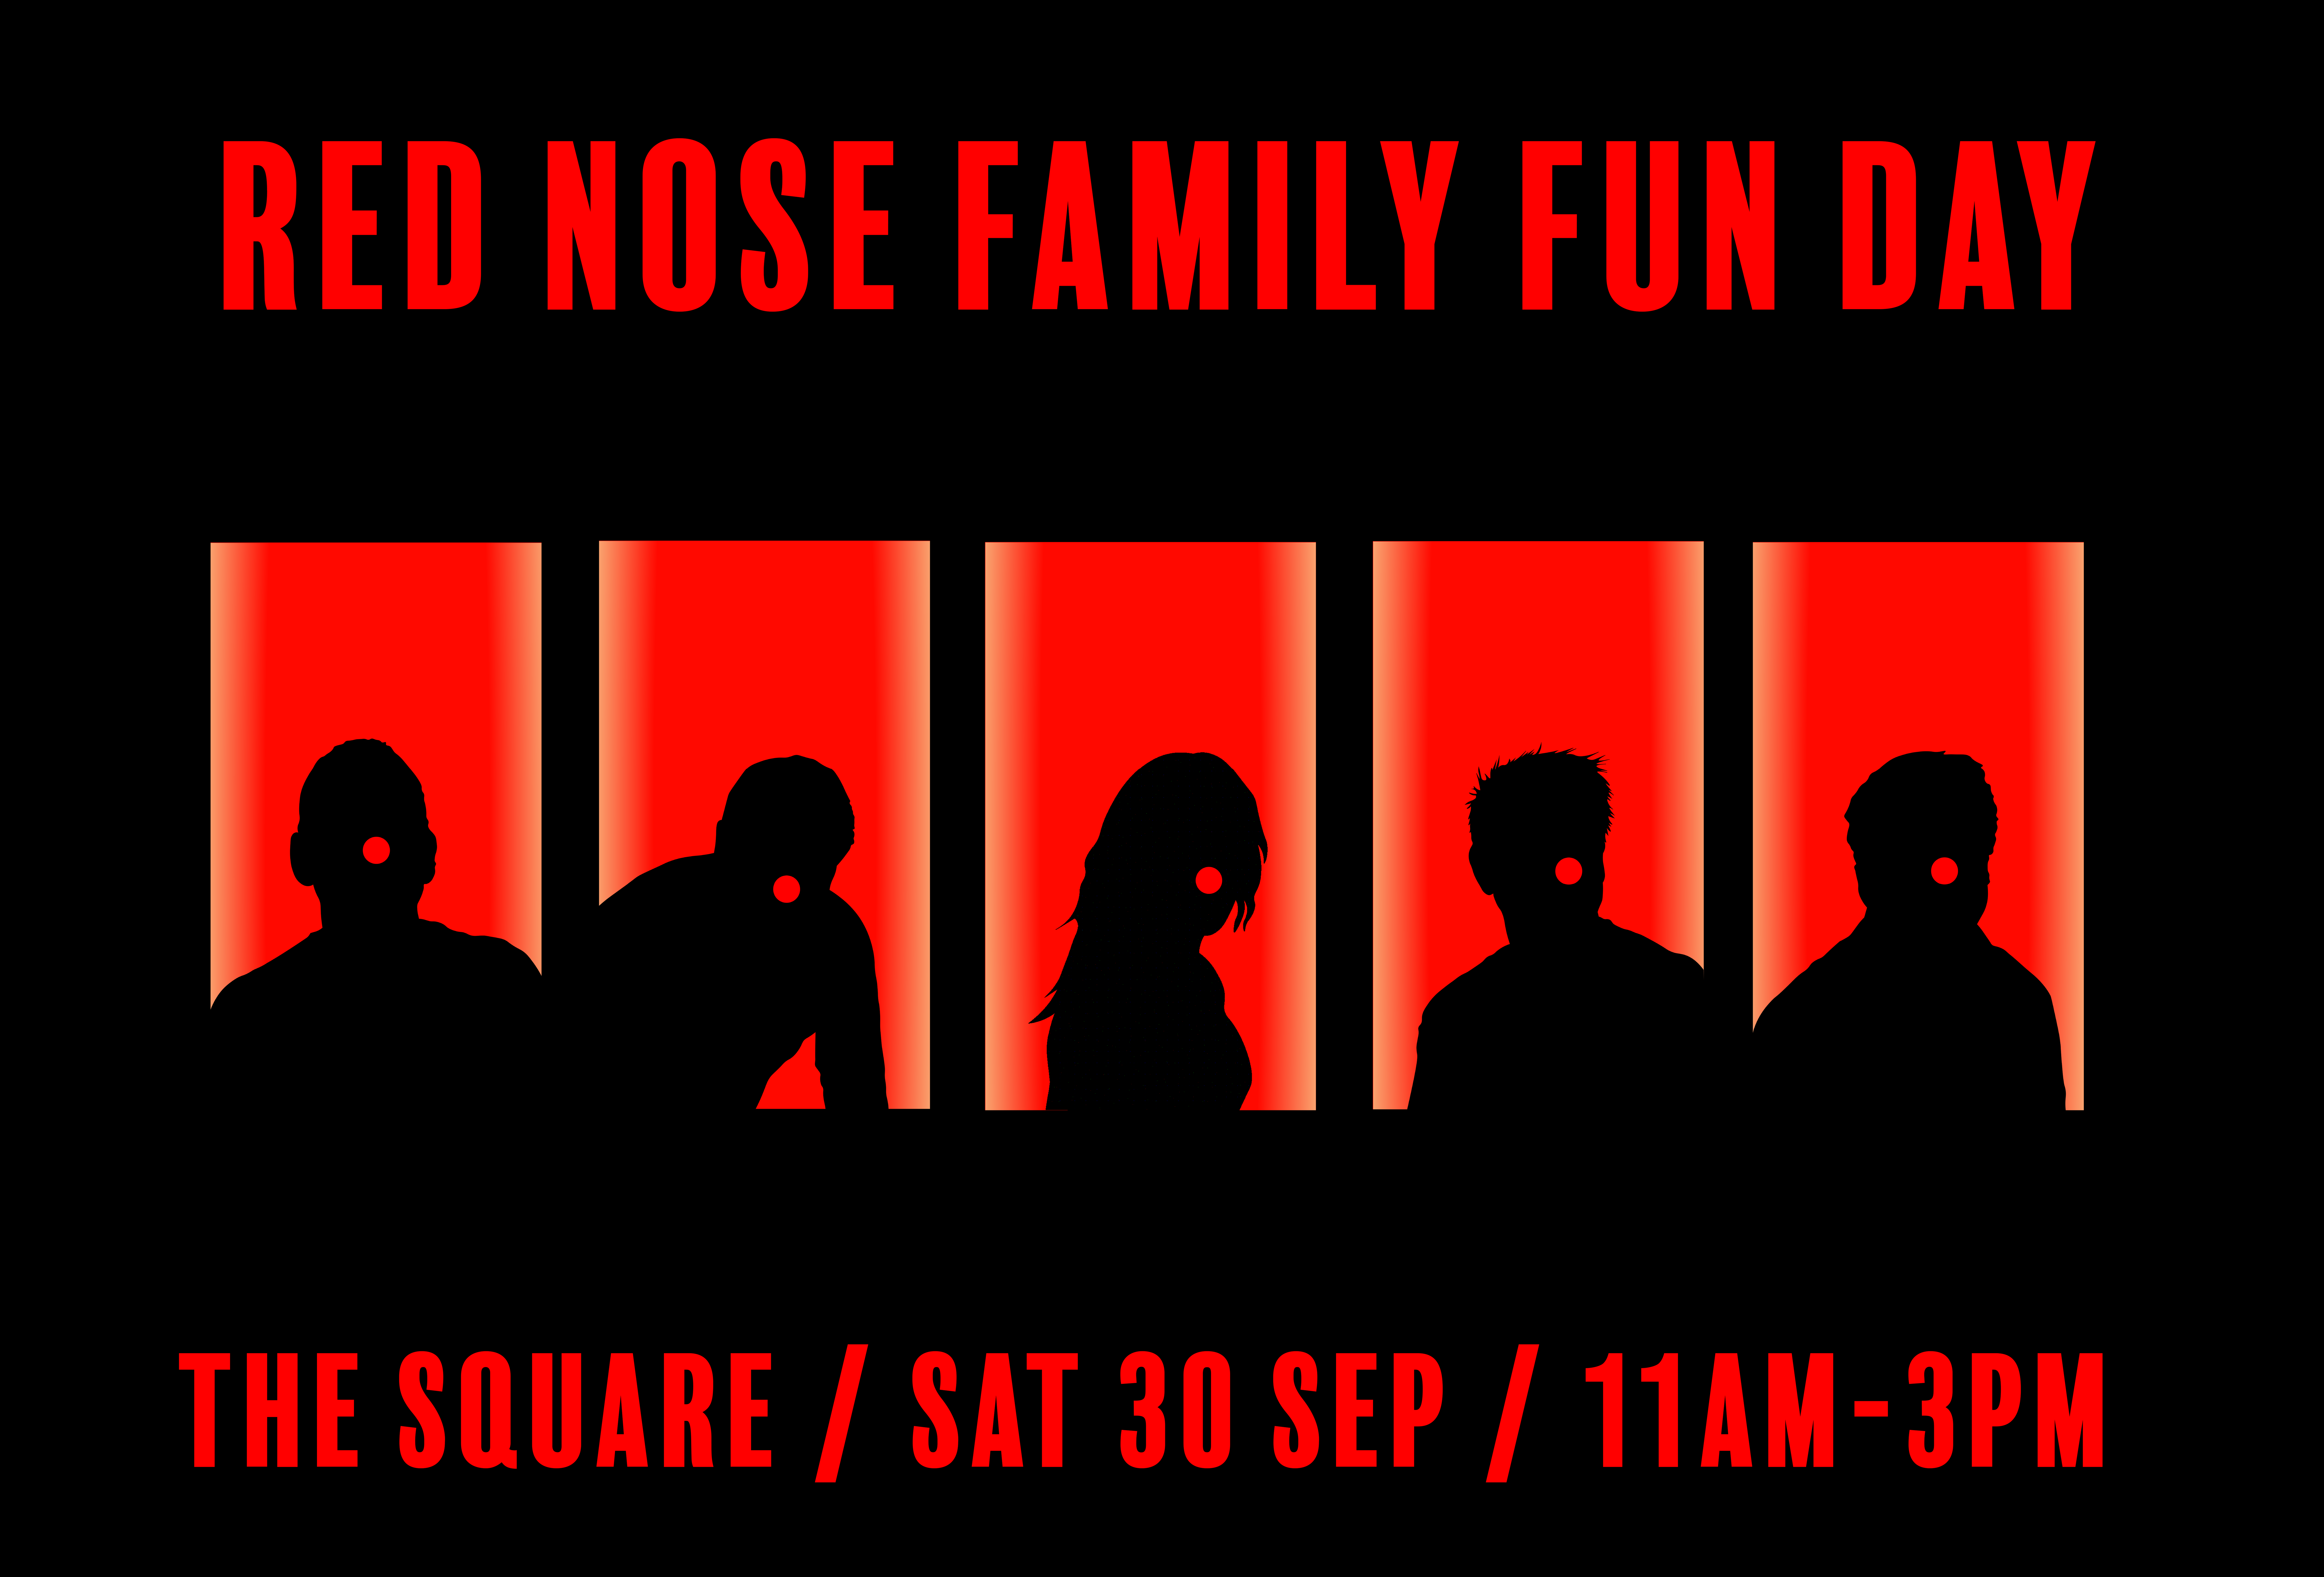 Red Nose Family Fun Day: Saturday, 30 September